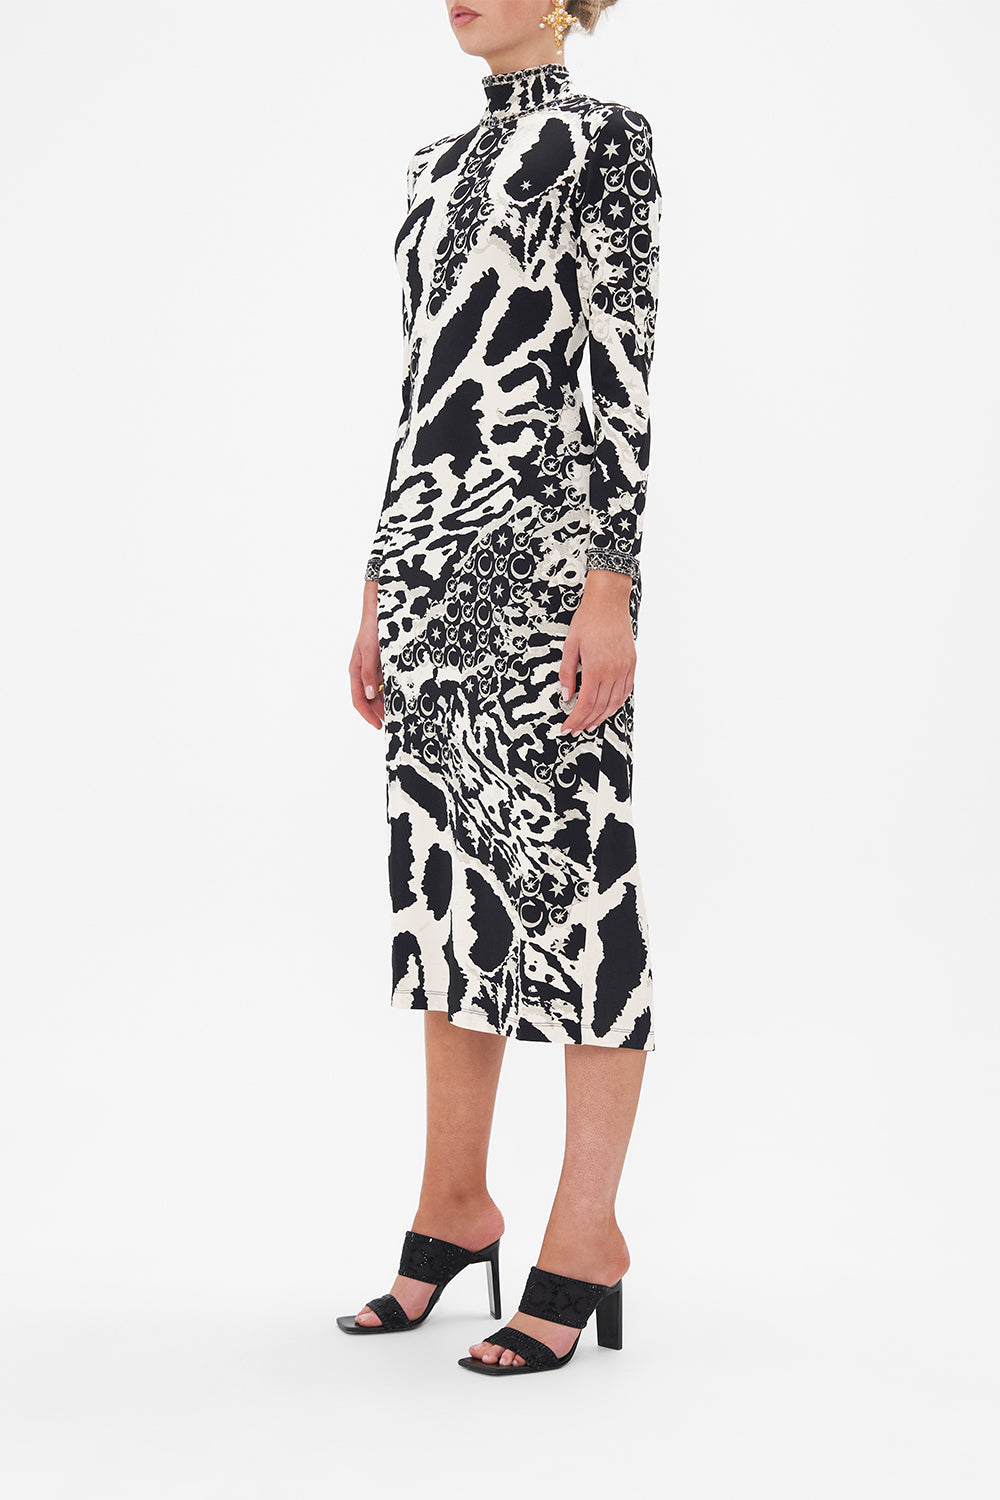 Side view of model wearing CAMILLA black and white jersey midi dress in Feline Fantasy print